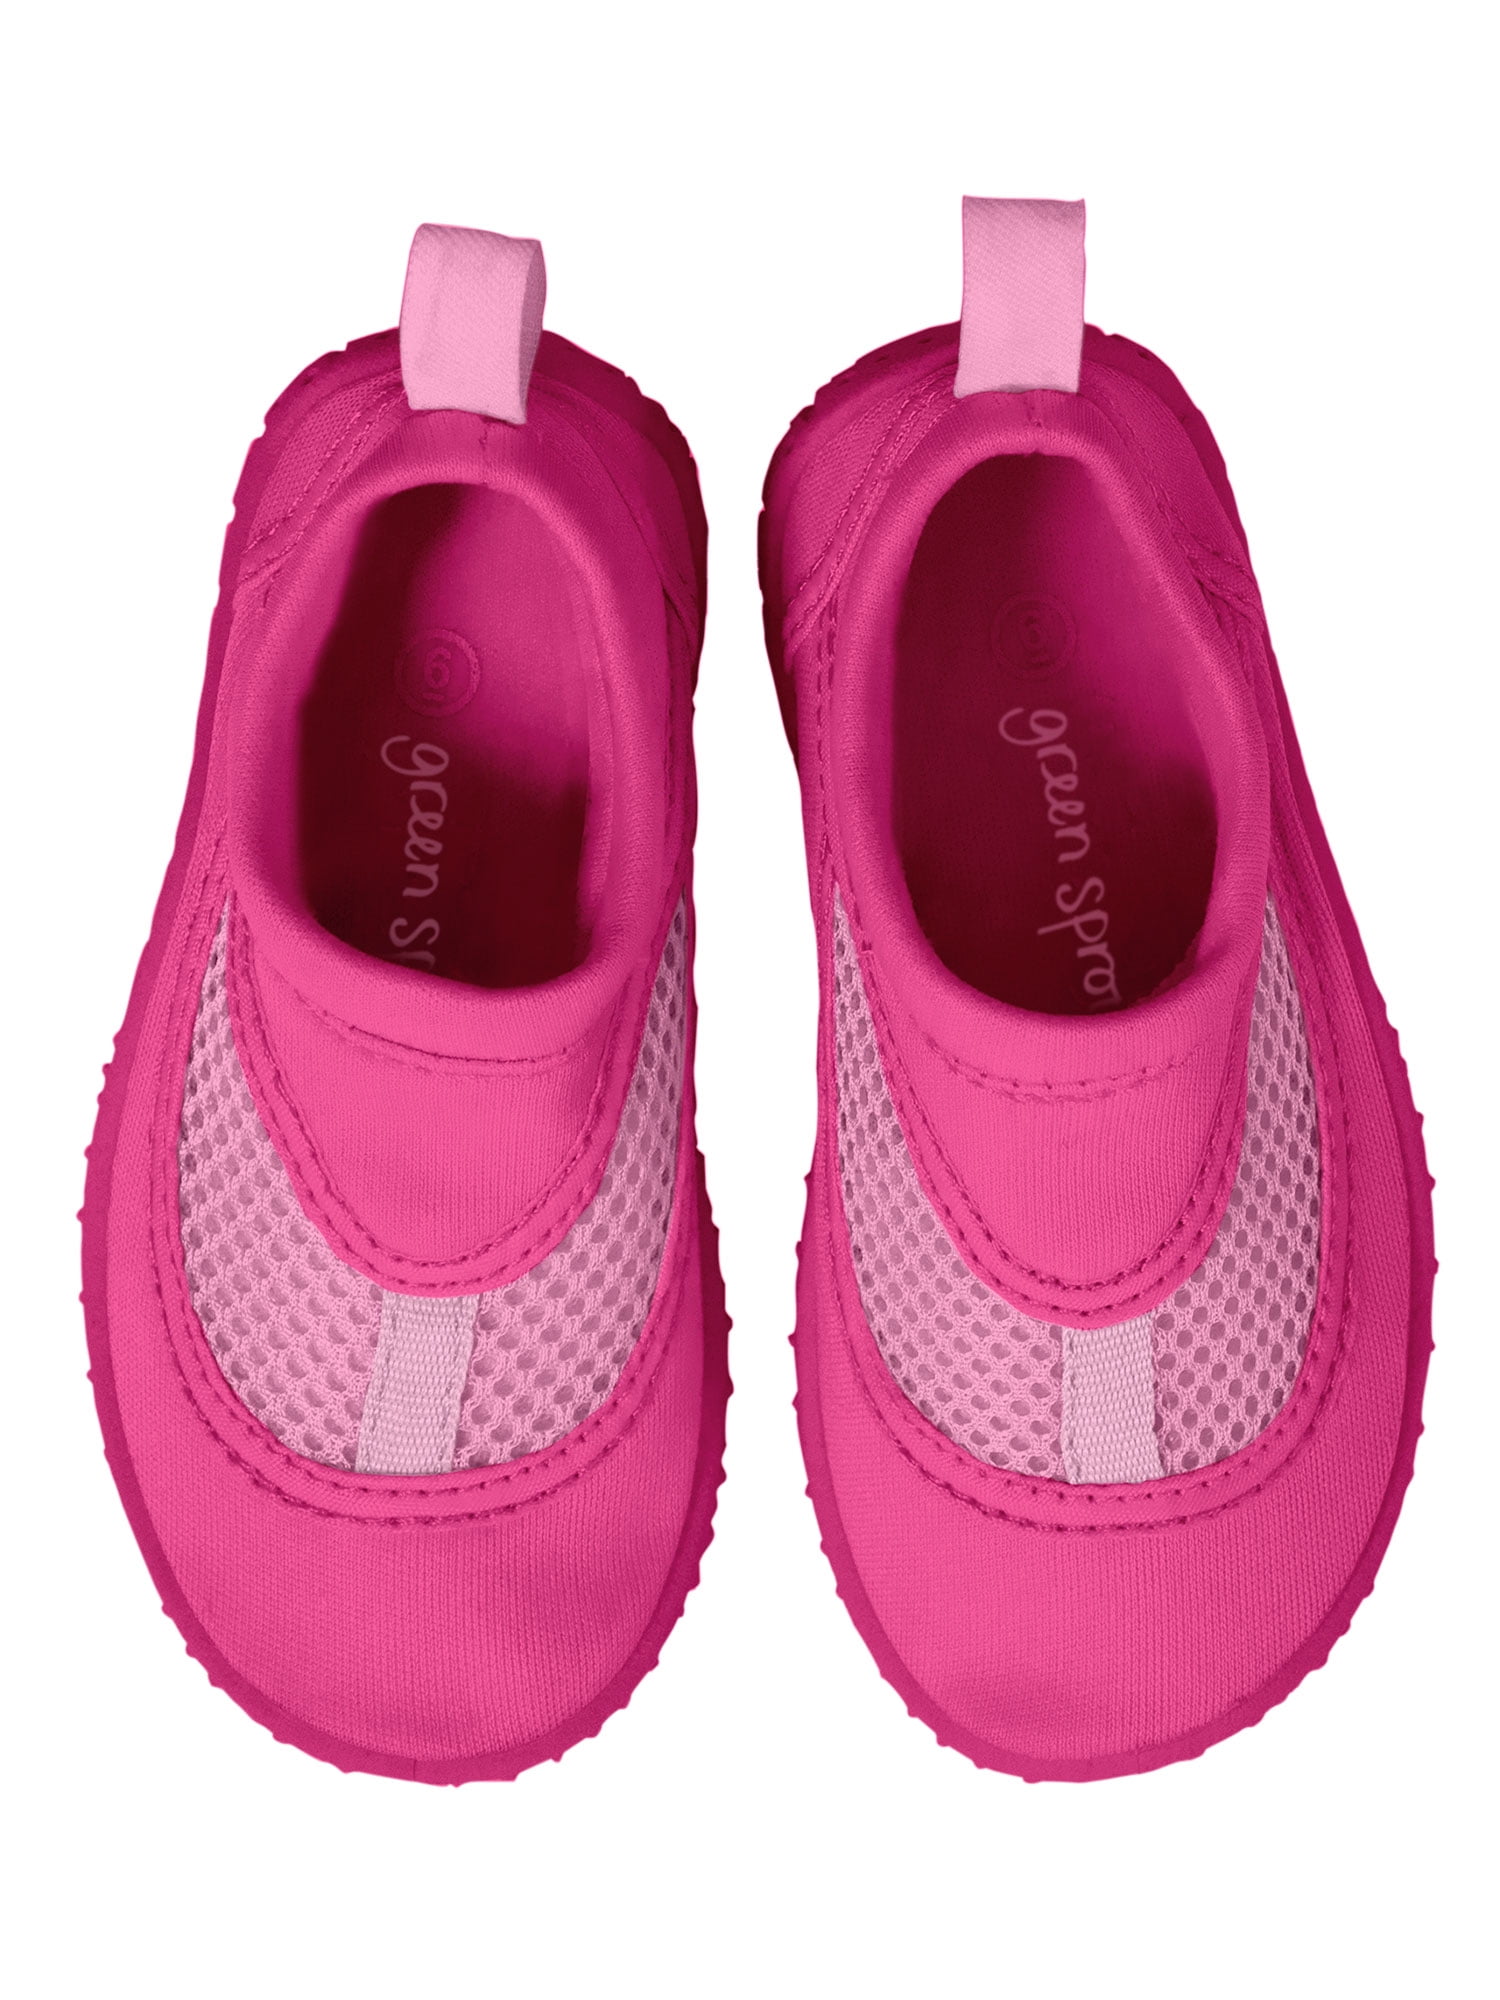 baby water shoes